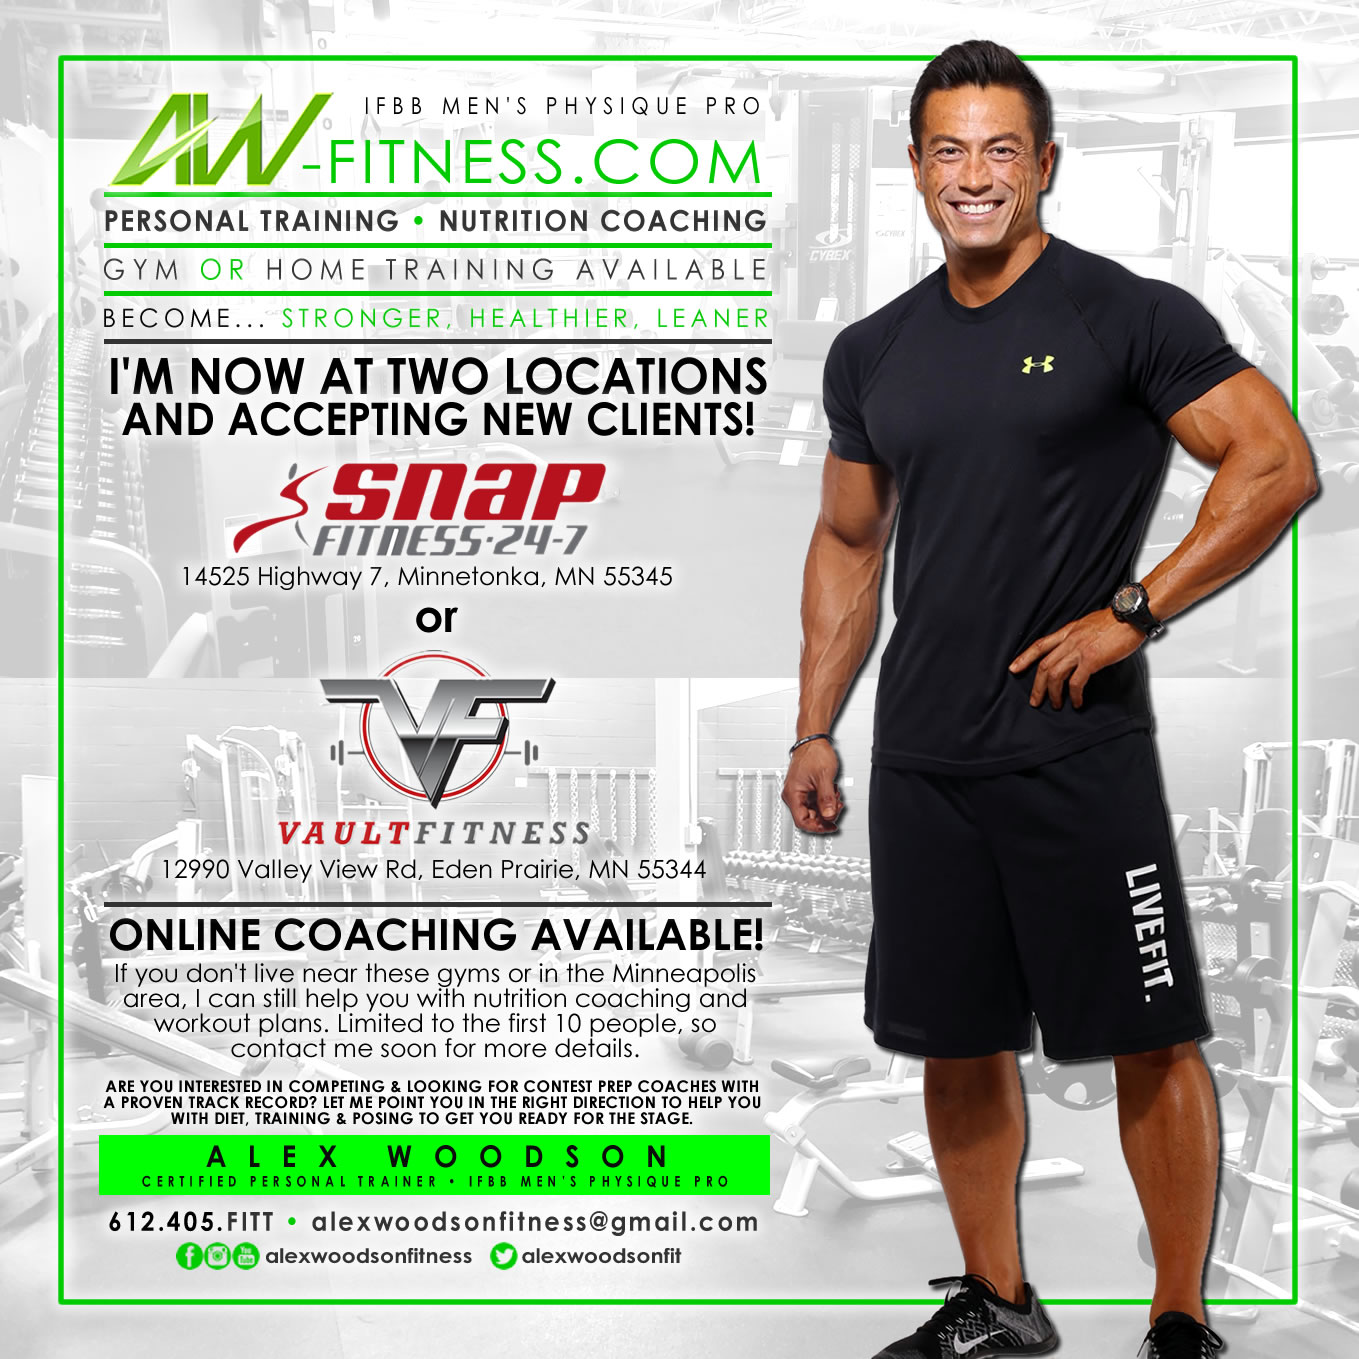 AW FITNESS / Personal Trainer Online Coach Men's Physique Pro